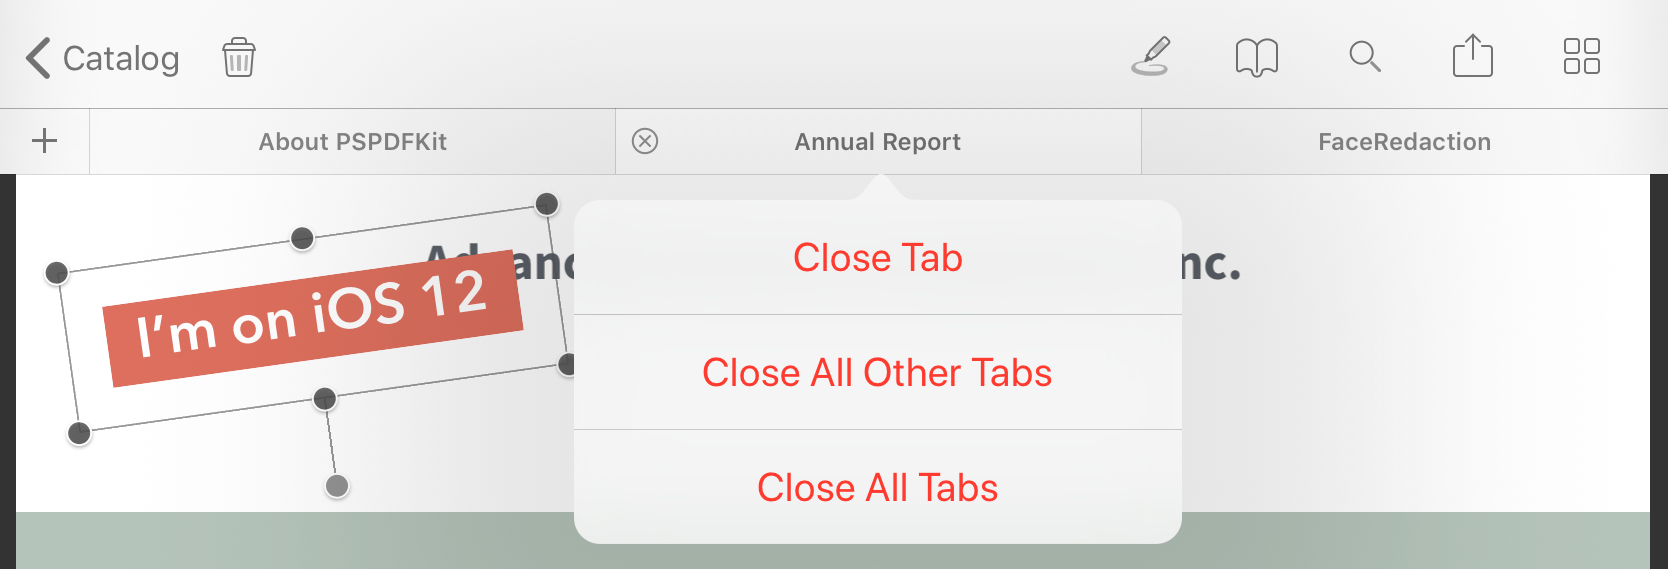 Screenshot of actions sheet on tabs showing the options Close Tab, Close All Other Tabs and Close All Tabs.